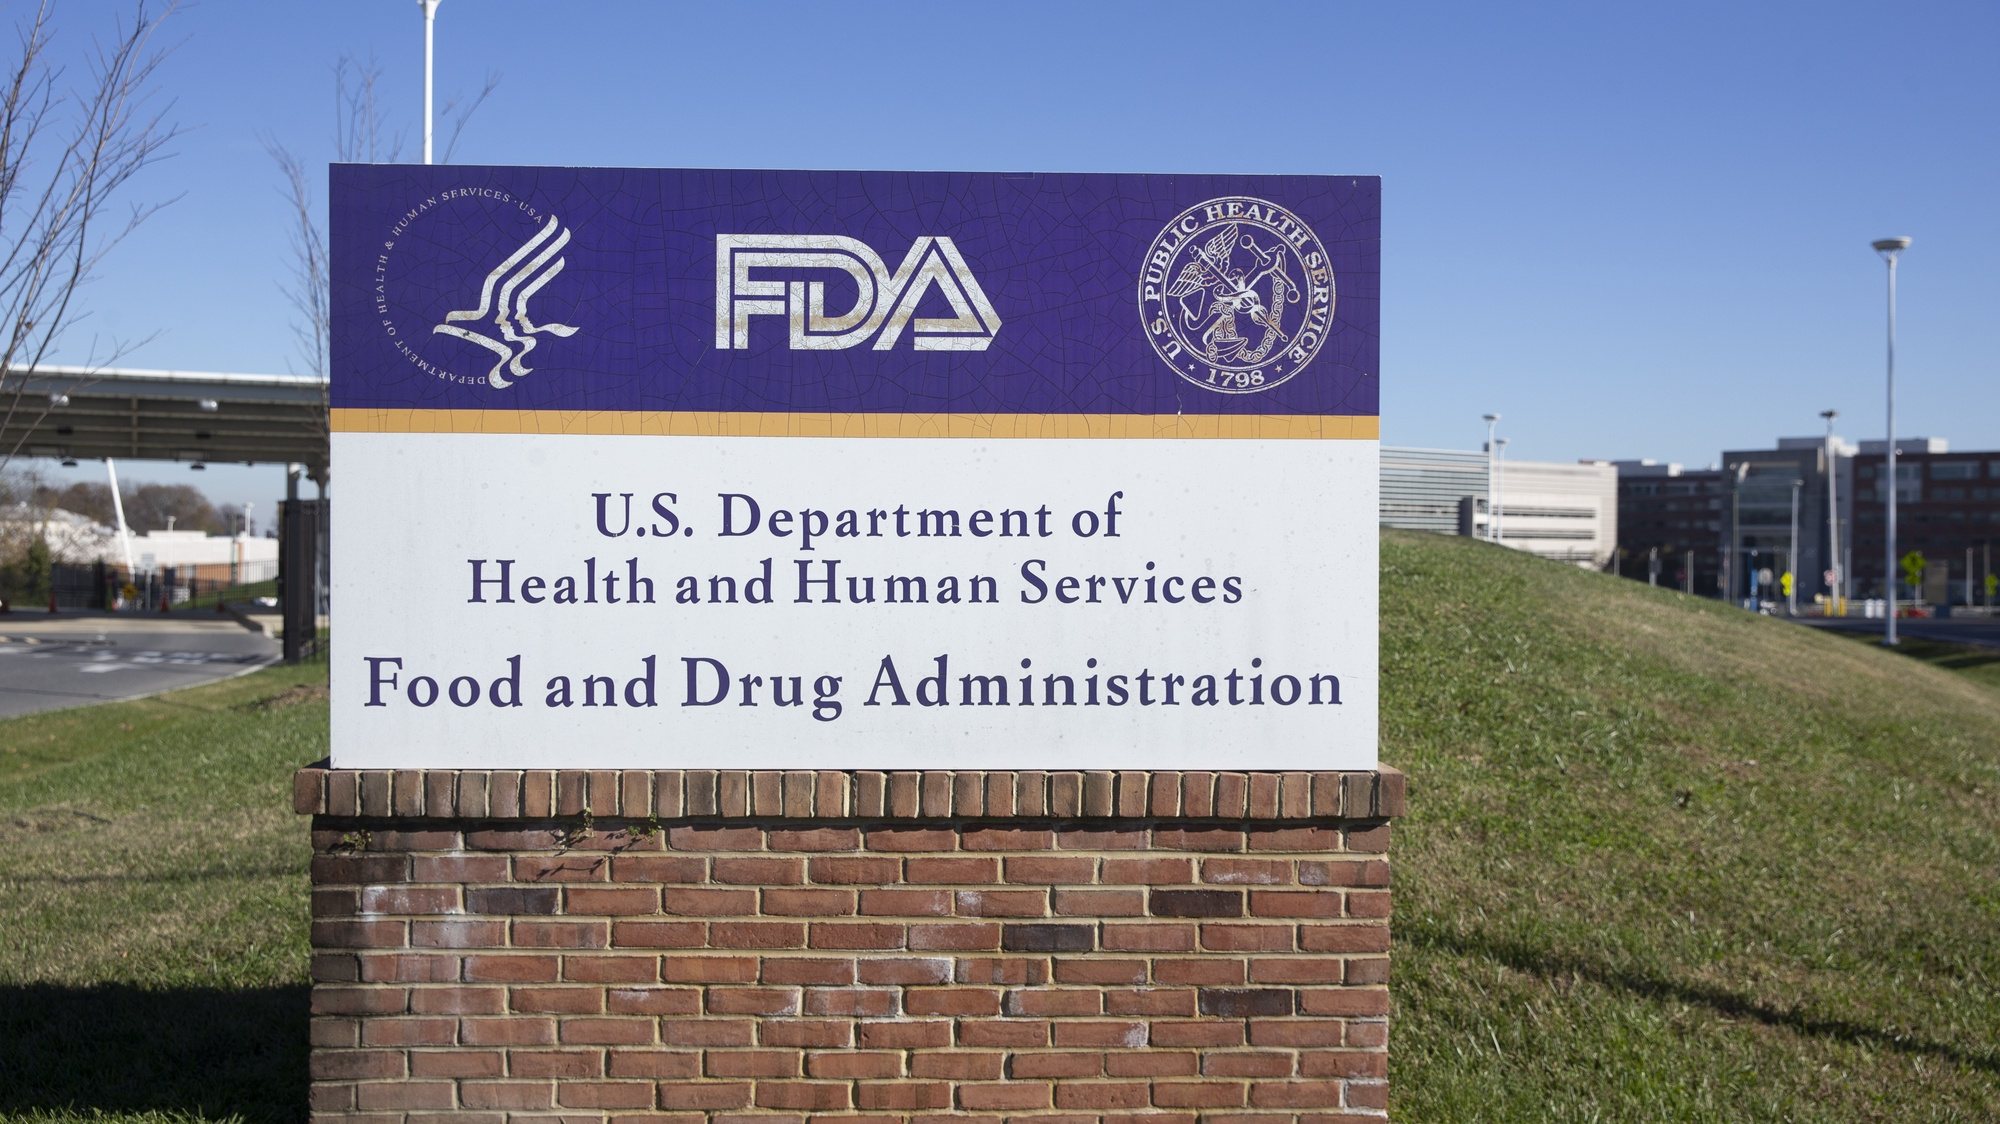 epa08831968 A United States Food and Drug Administration (FDA) sign is seen at the White Oak campus in Silver Spring, Maryland, USA, 20 November 2020. Pfizer Inc. and BioNTech SE are seeking authorization from regulators at the FDA to use their COVID-19 vaccine.  EPA/MICHAEL REYNOLDS